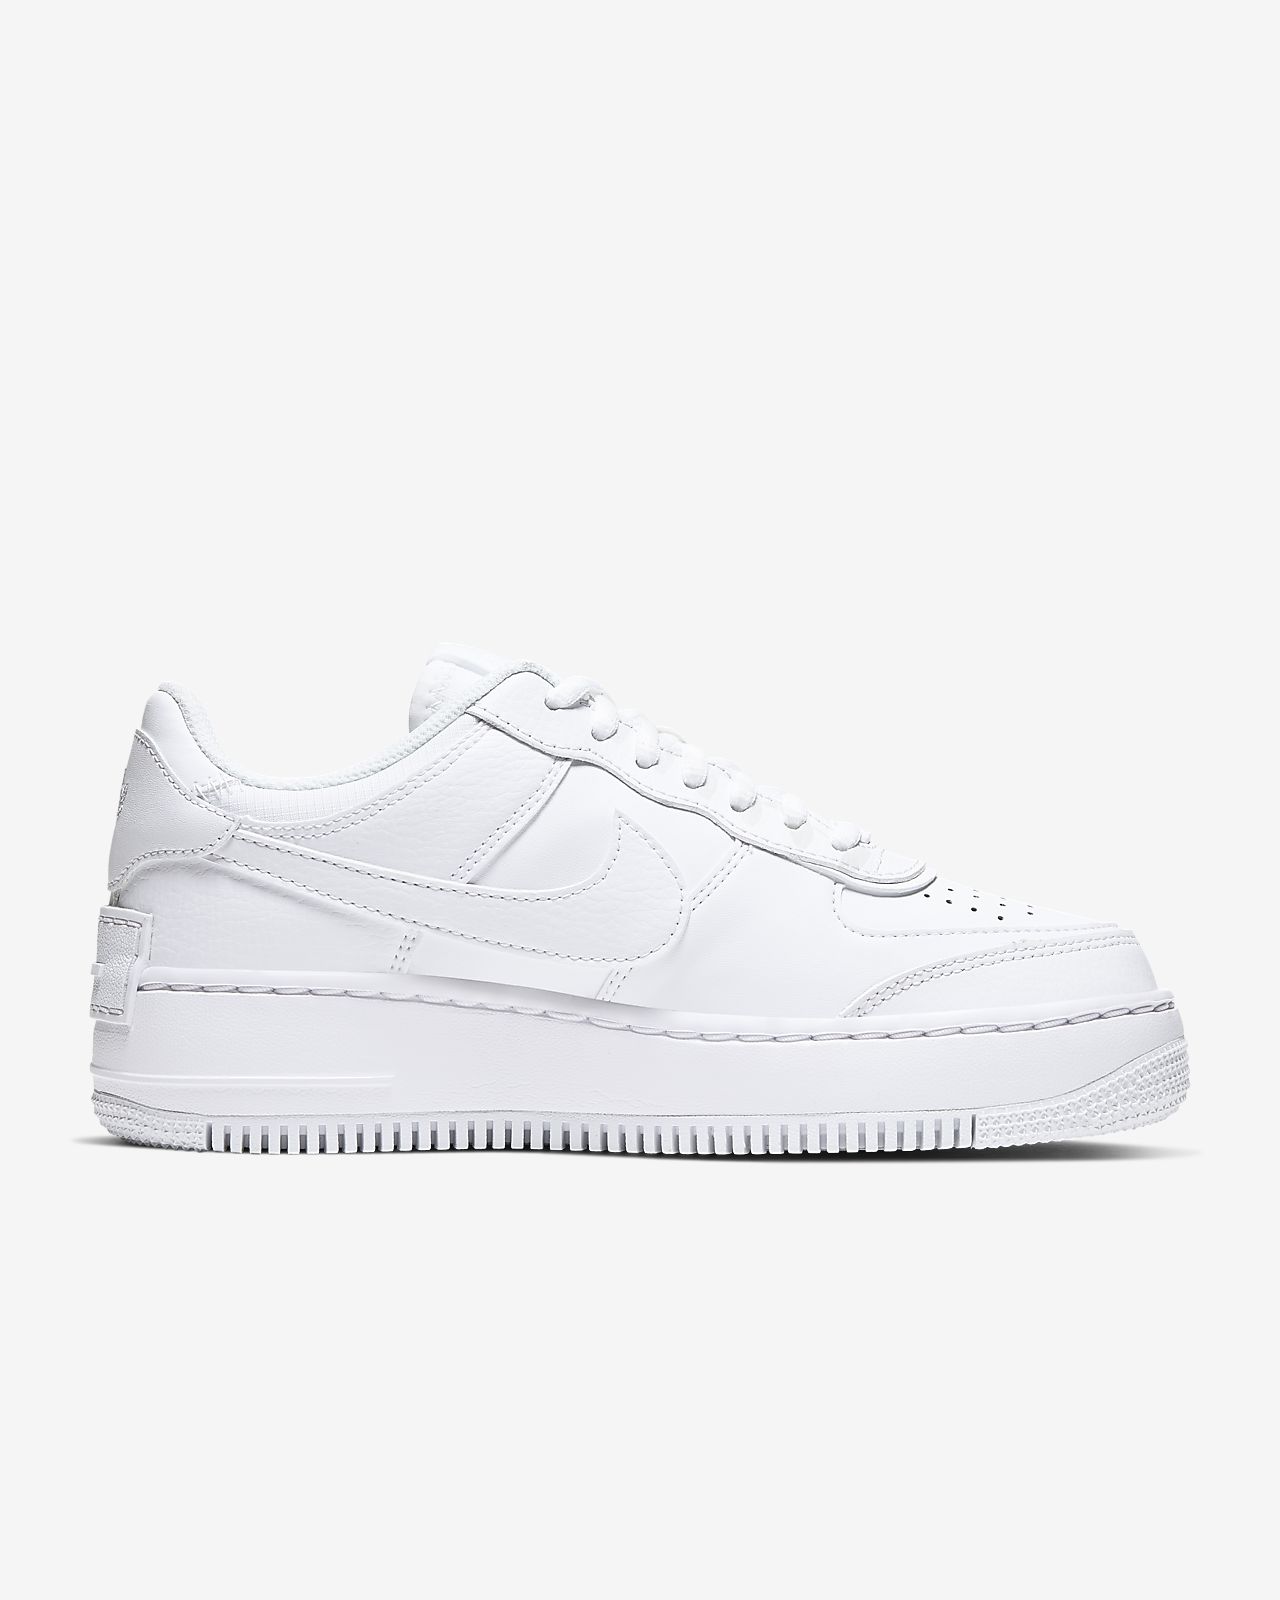 womens air force one sneakers promo 